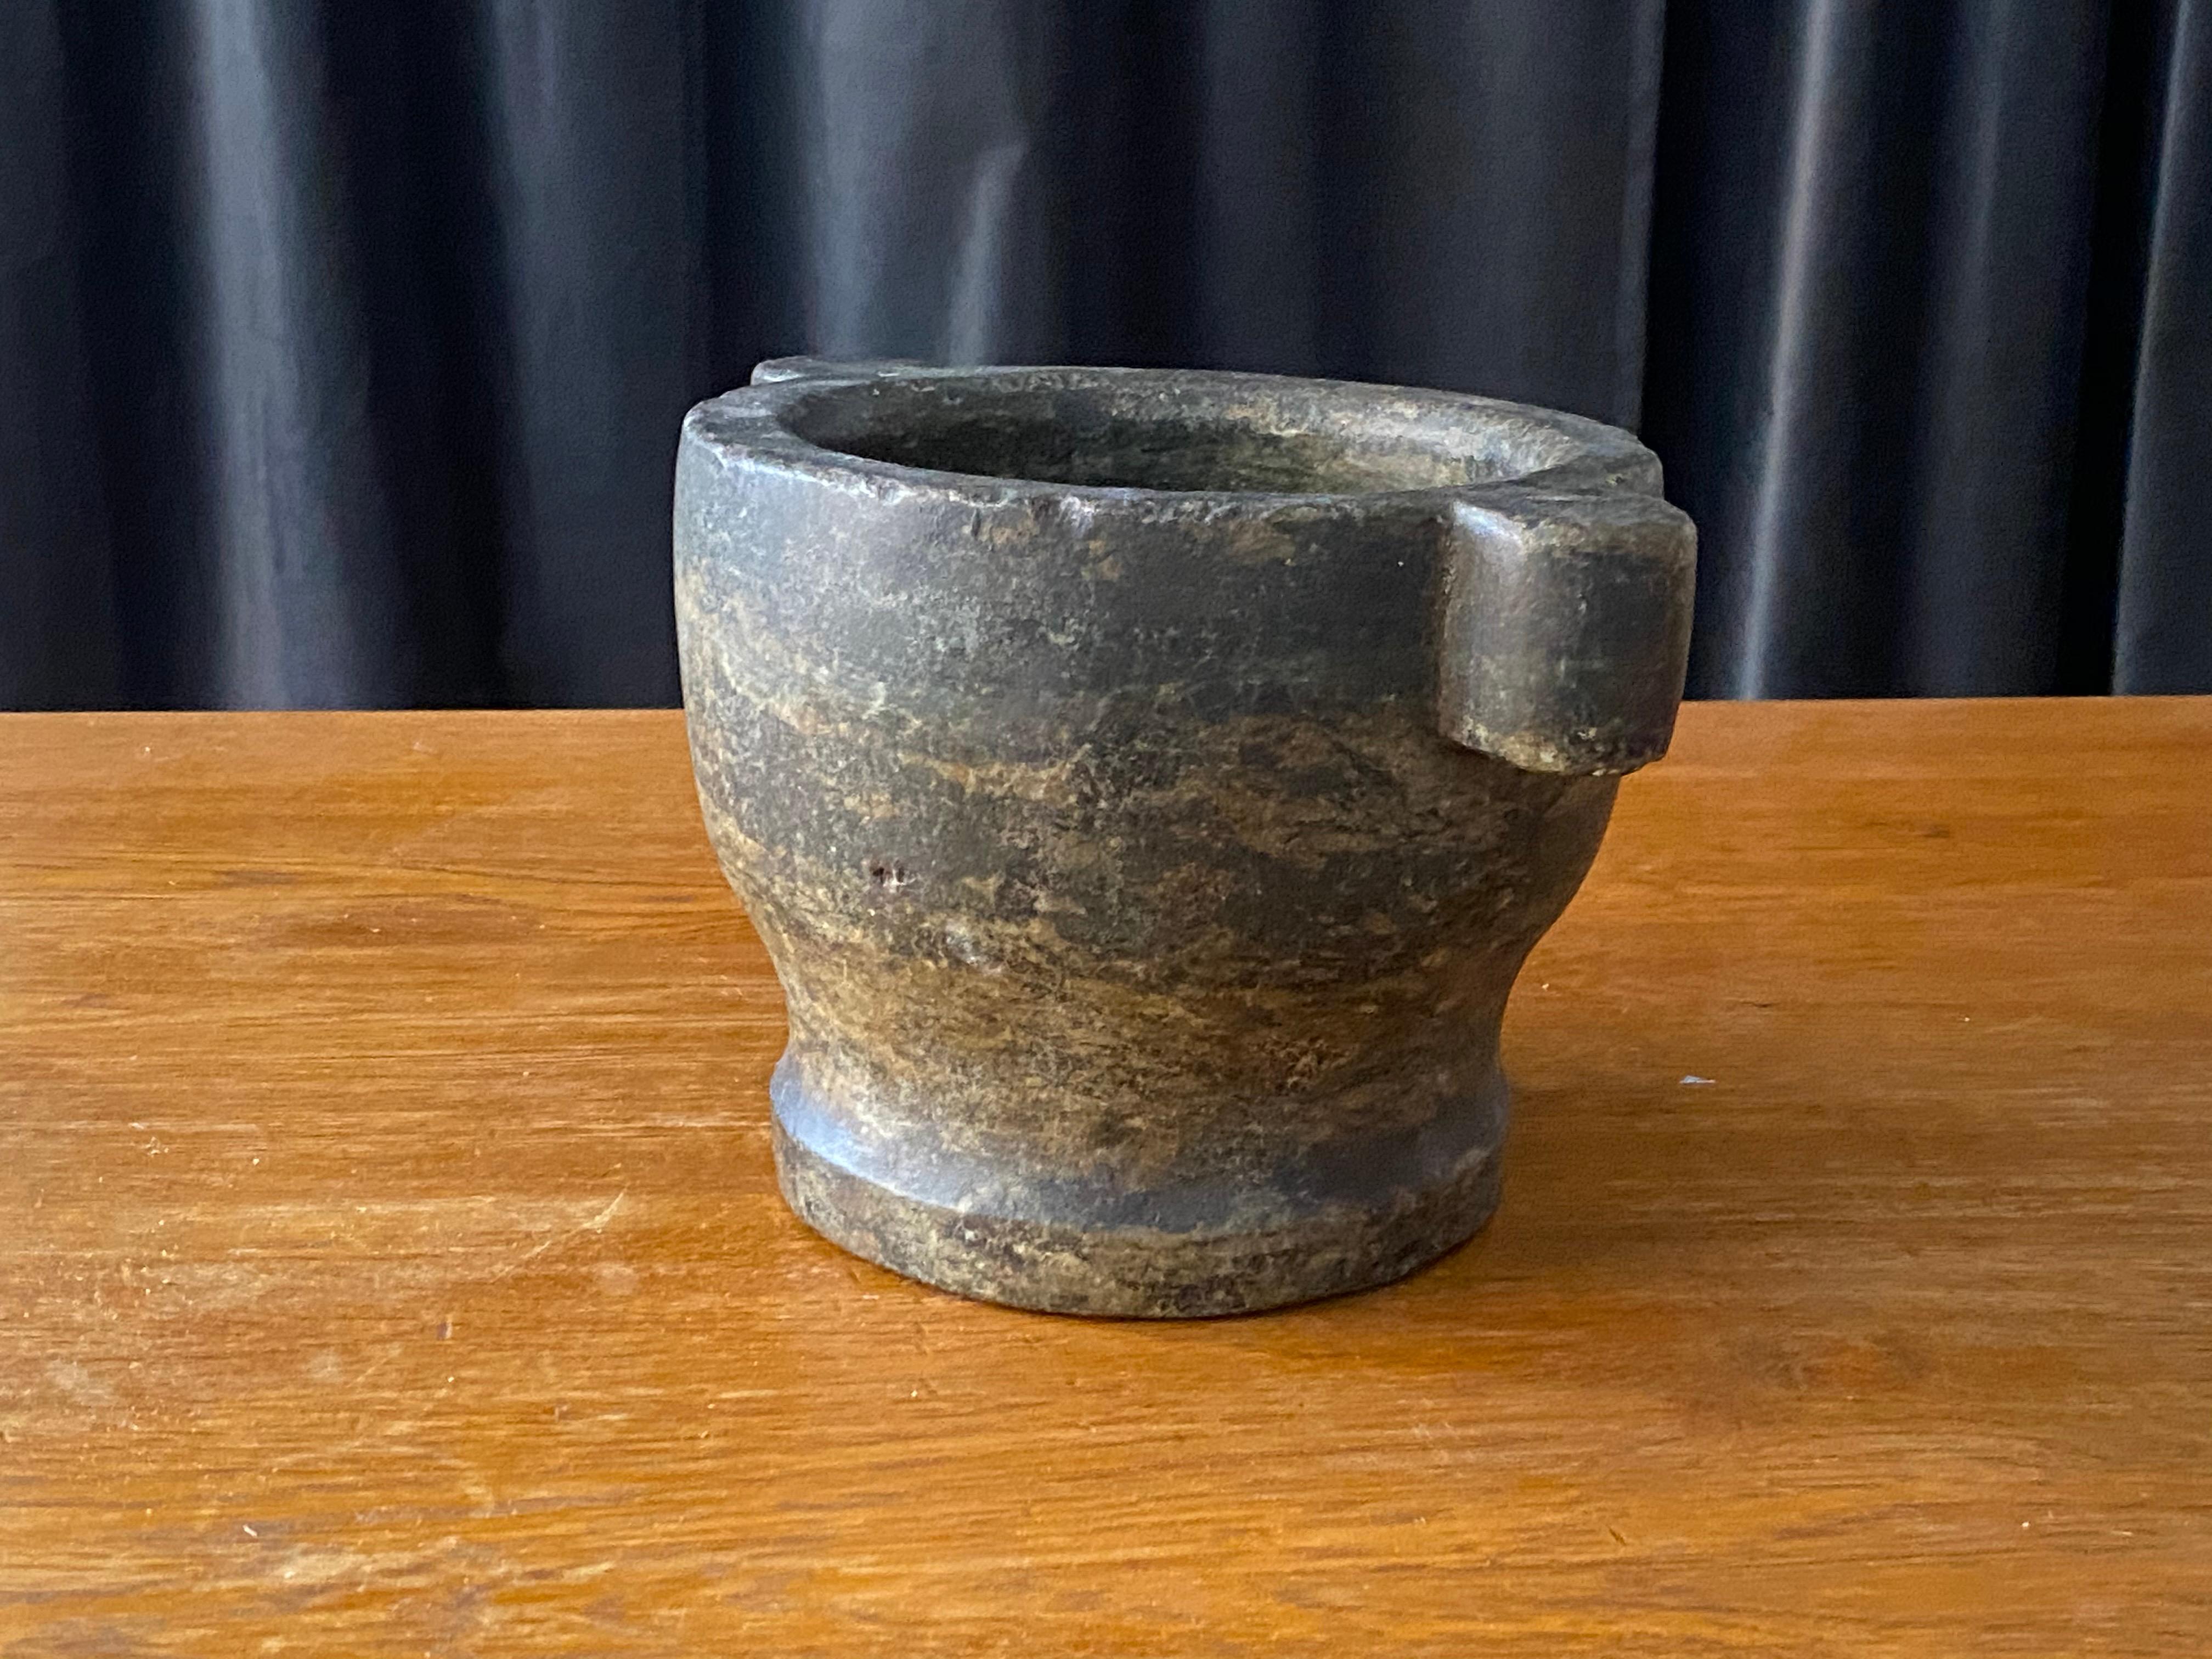 A unique sizable pestle or grinding bowl. Produced in Sweden, late 18th century. Produced in Swedish green marble, extracted in quarries in Kolmården, in the north-eastern part of the province of Östergötland in Sweden. It is fine-grained, with a